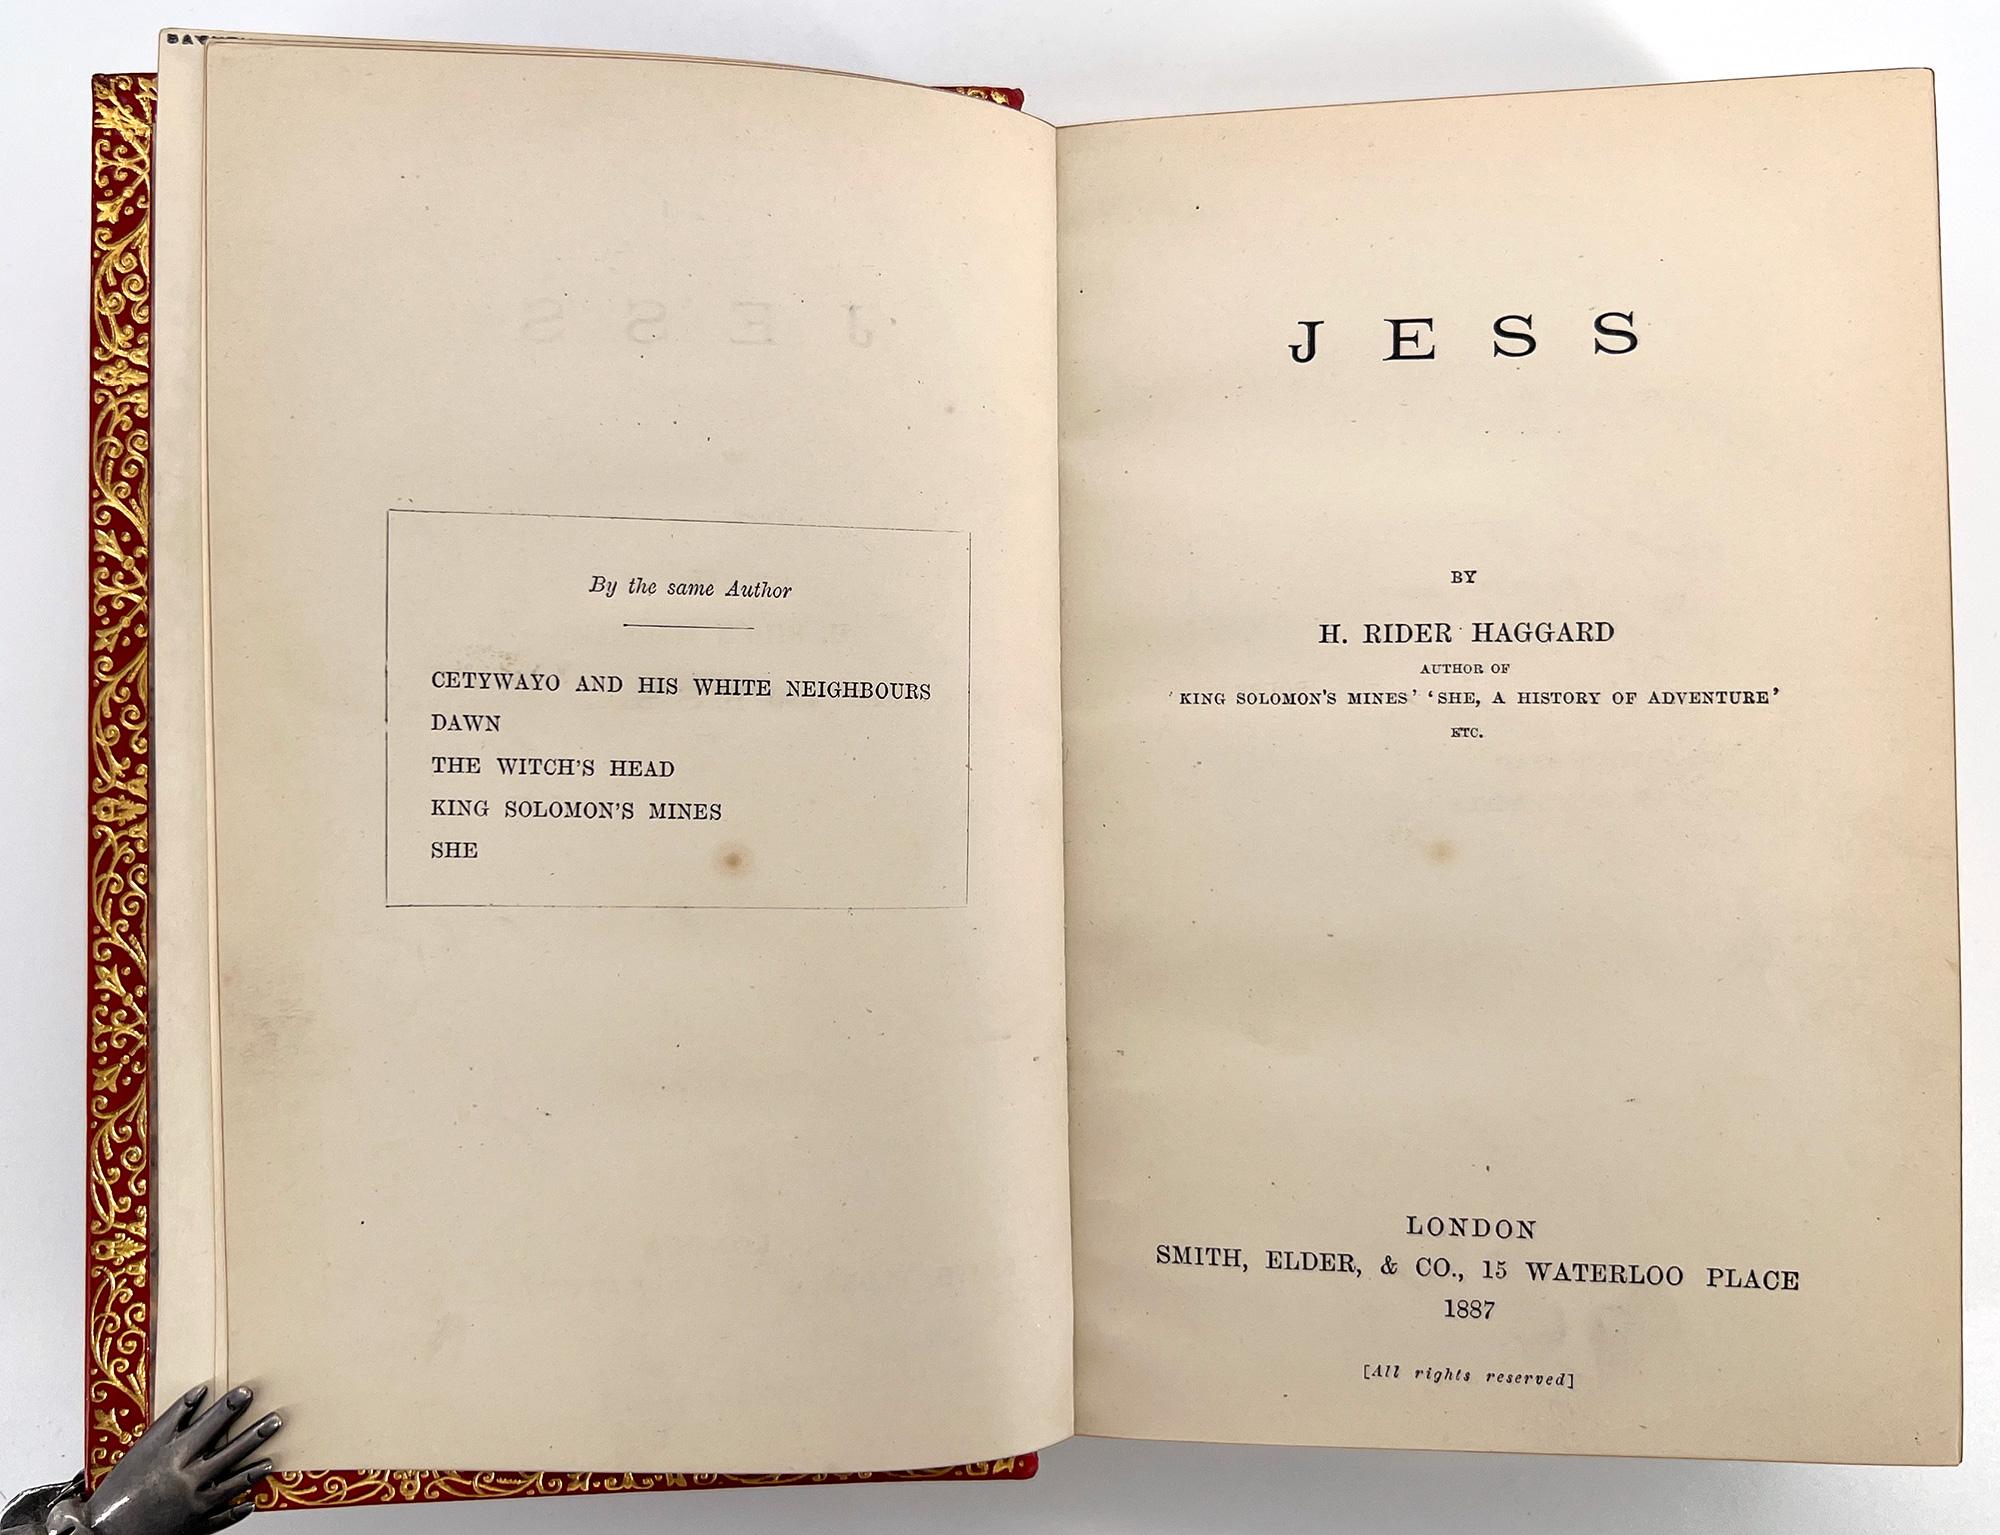 English Jess by H. Rider HAGGARD in a Handsome binding For Sale